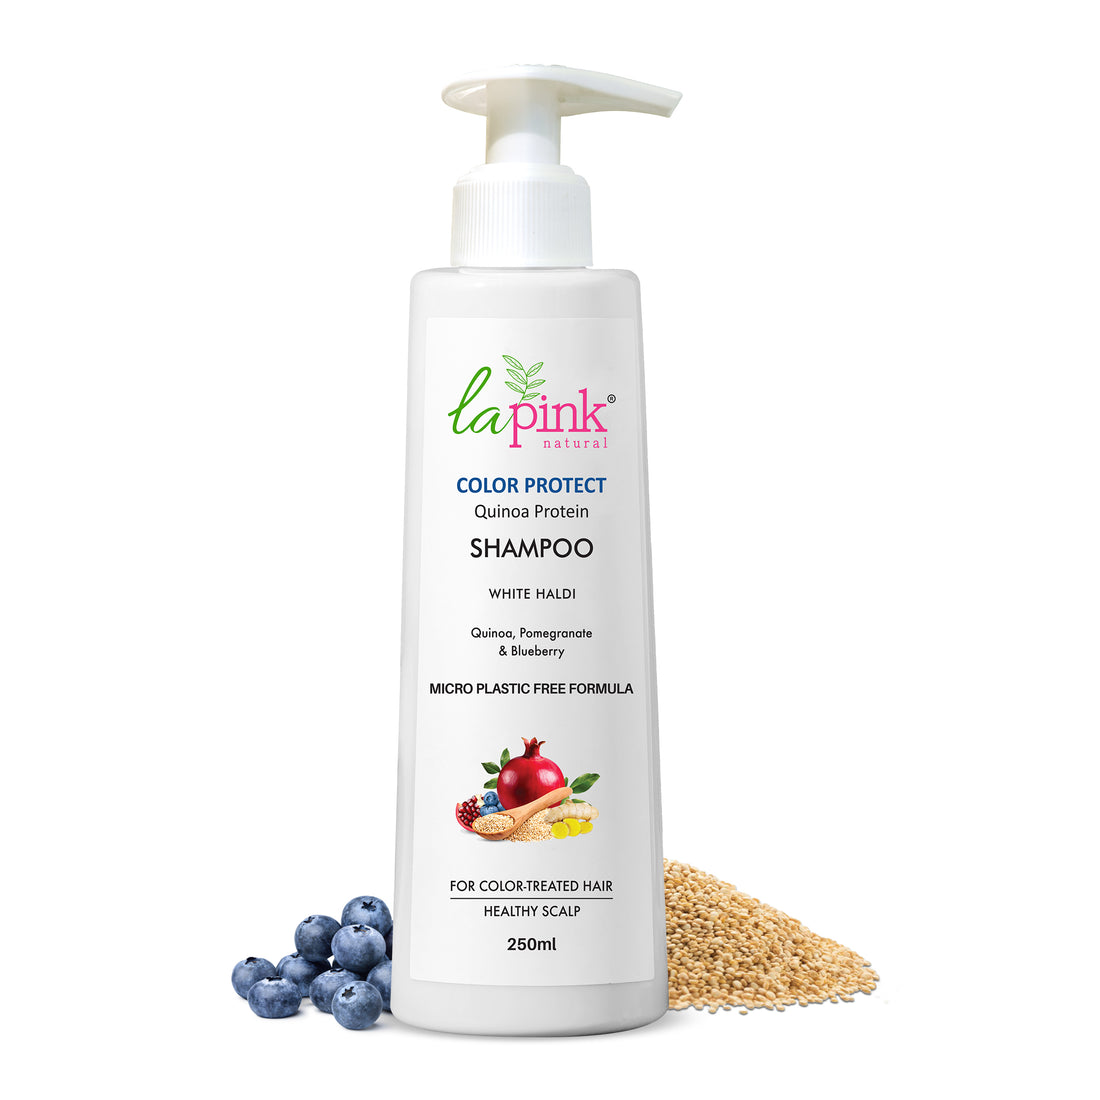 Color Protect Quinoa Protein Shampoo with White Haldi for Color-treated Hair